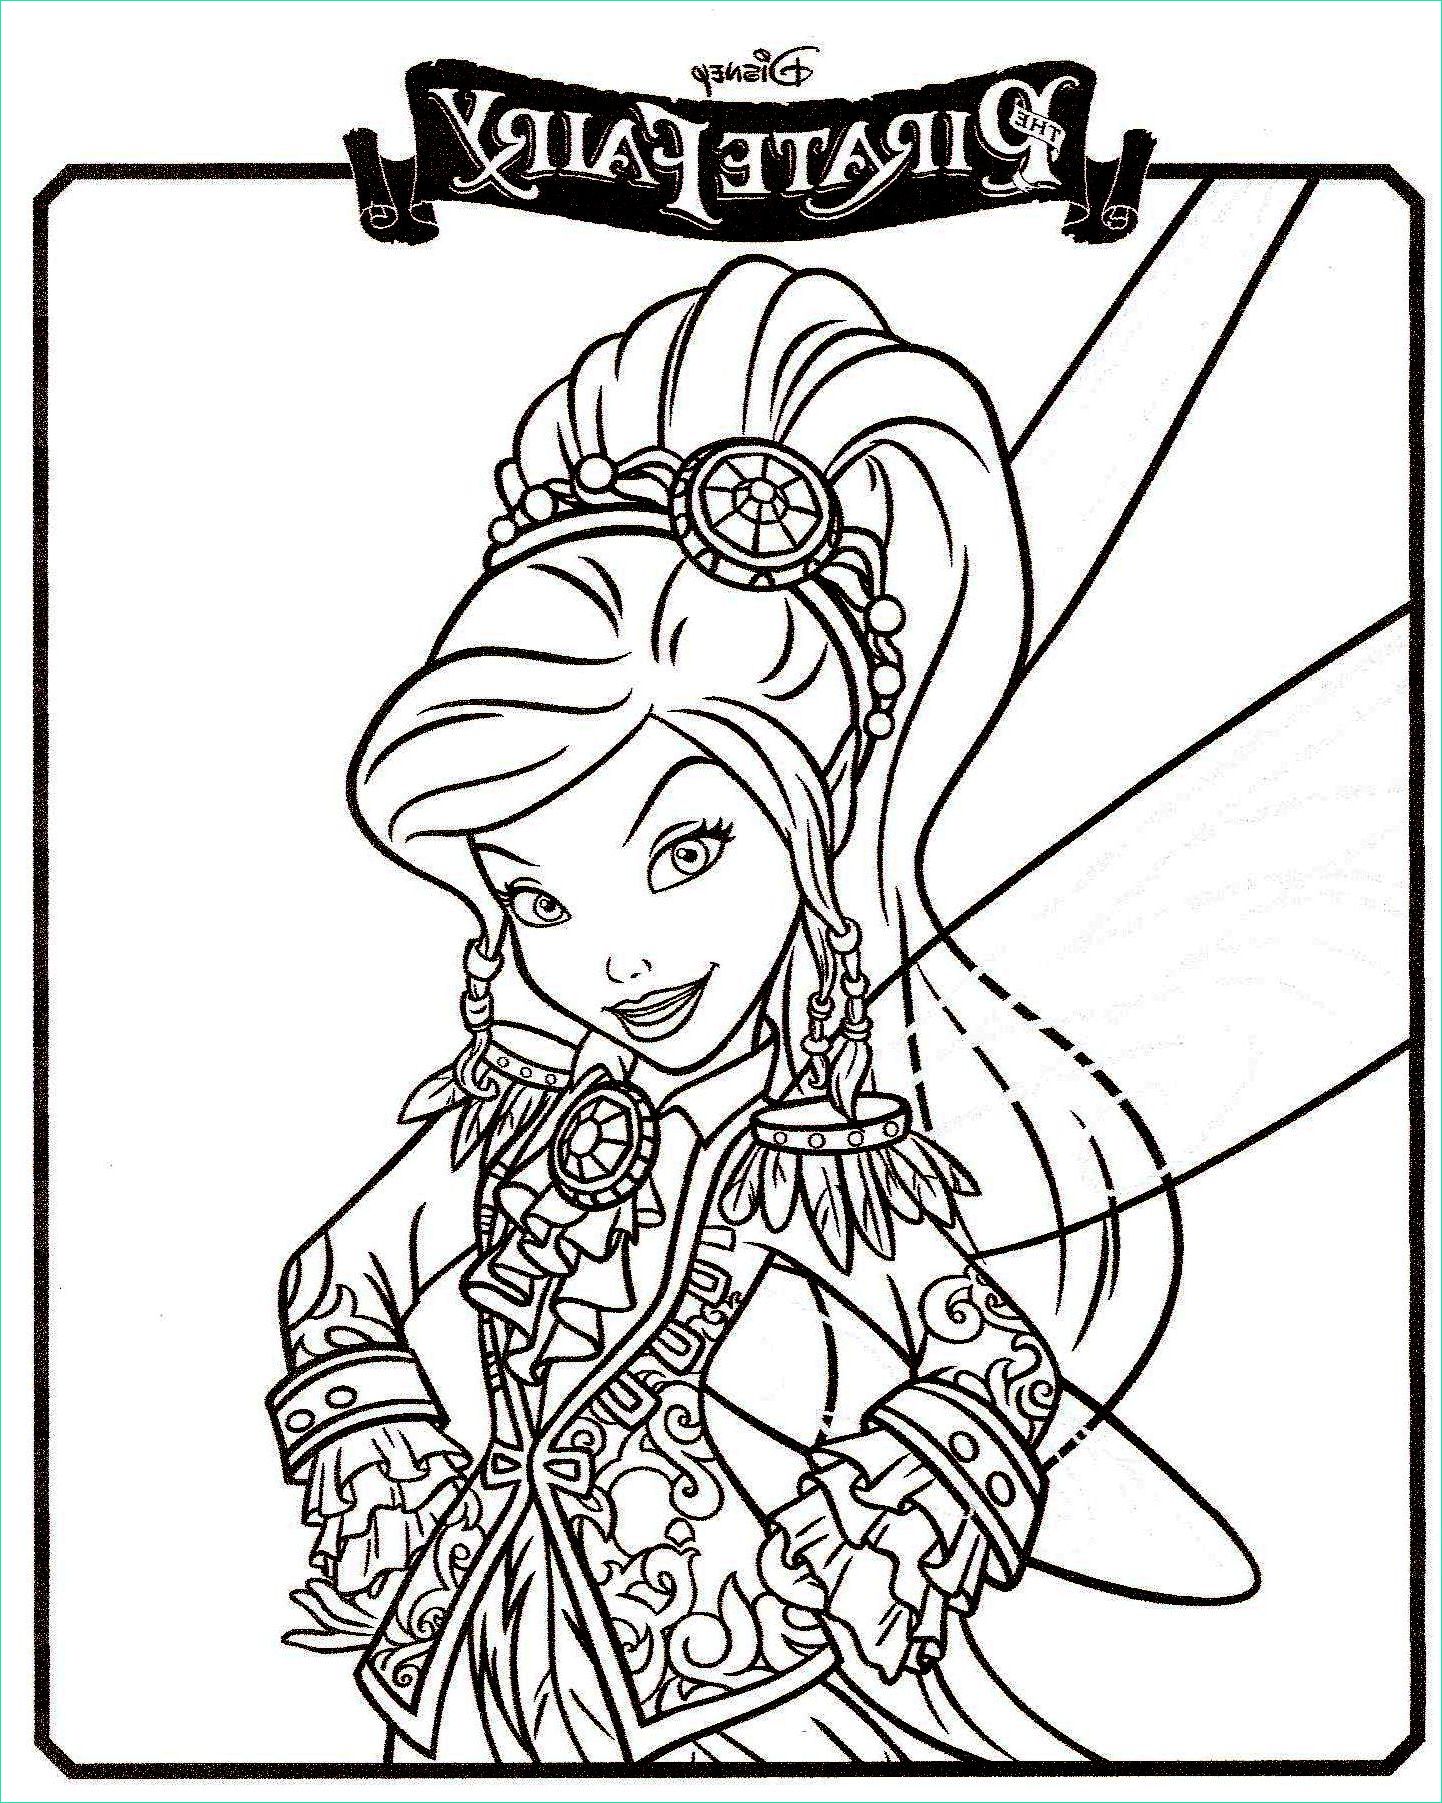 Pirate Coloriage Cool Images Coloriage Pirate